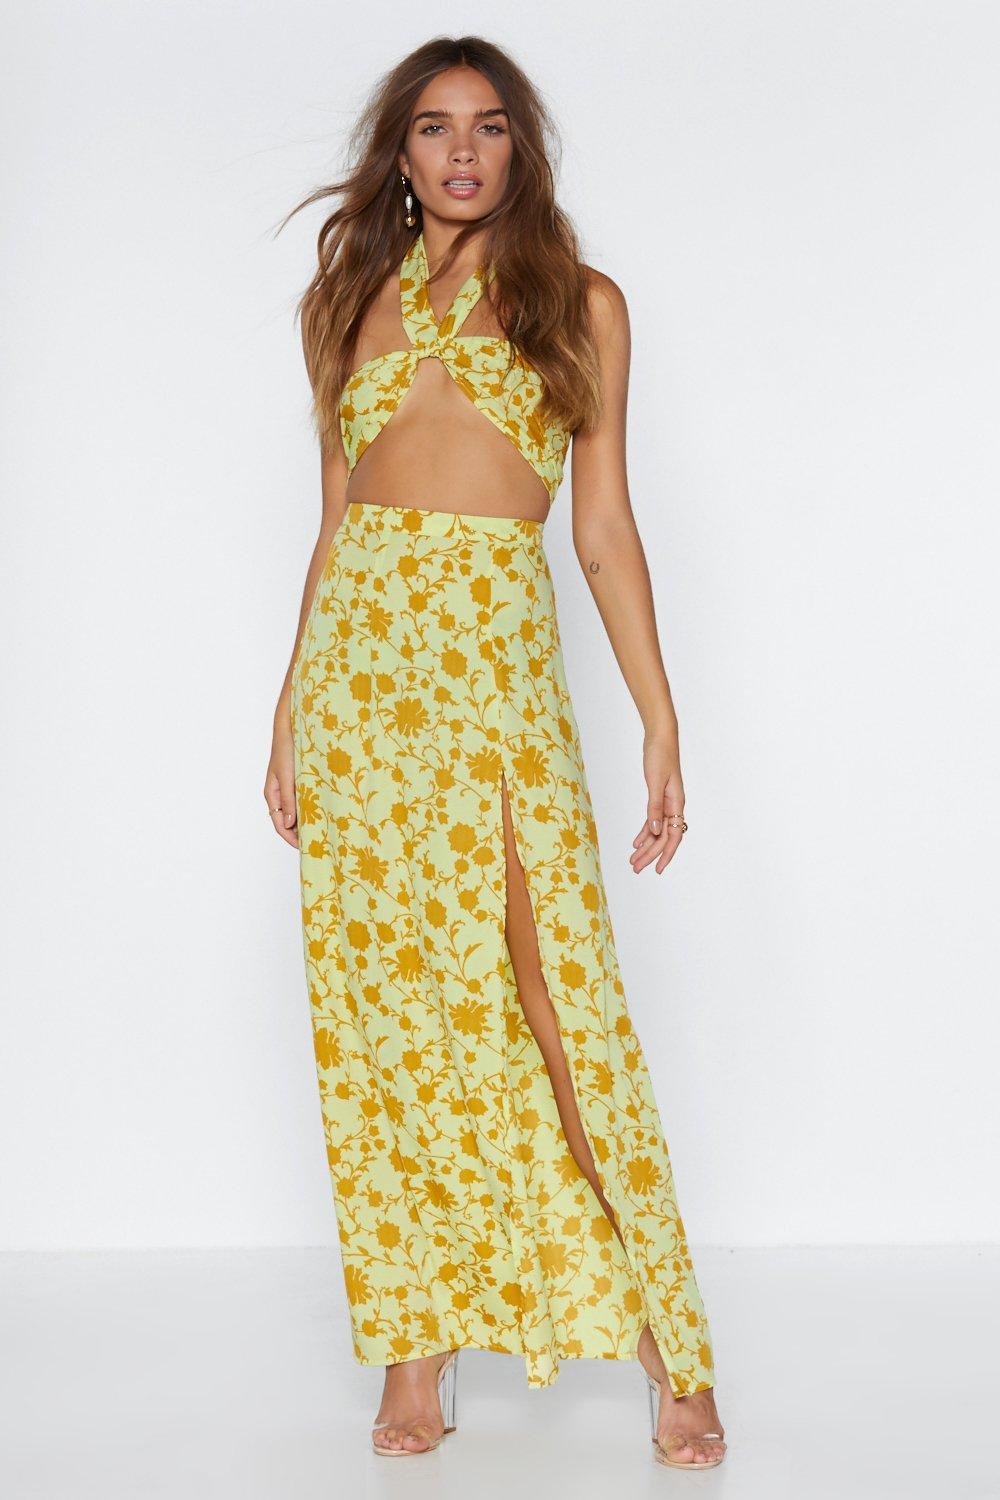 maxi skirt with halter top